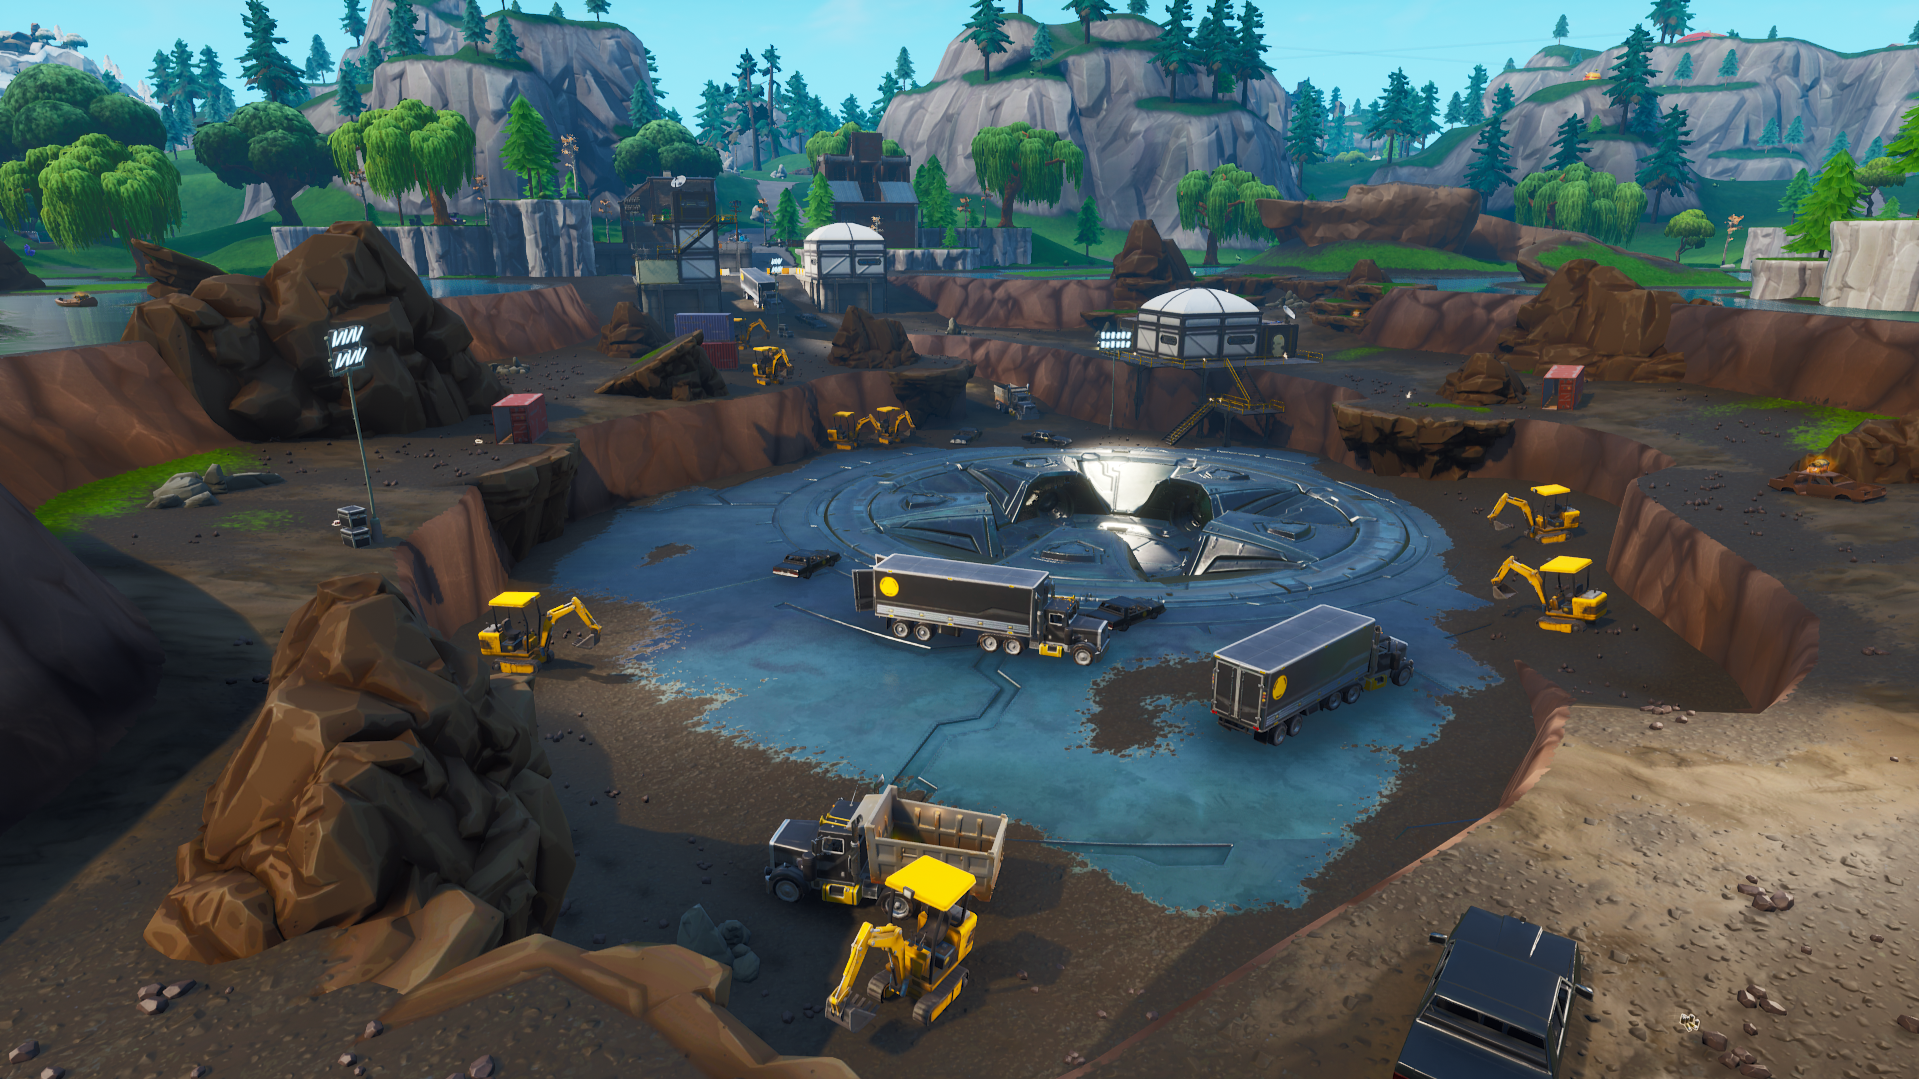 New Fortnite Loot Lake V8 40 Map Changes Loot Lake S Secret The Battle For Retail Row An Update On The Viking Invasion Fortnite News